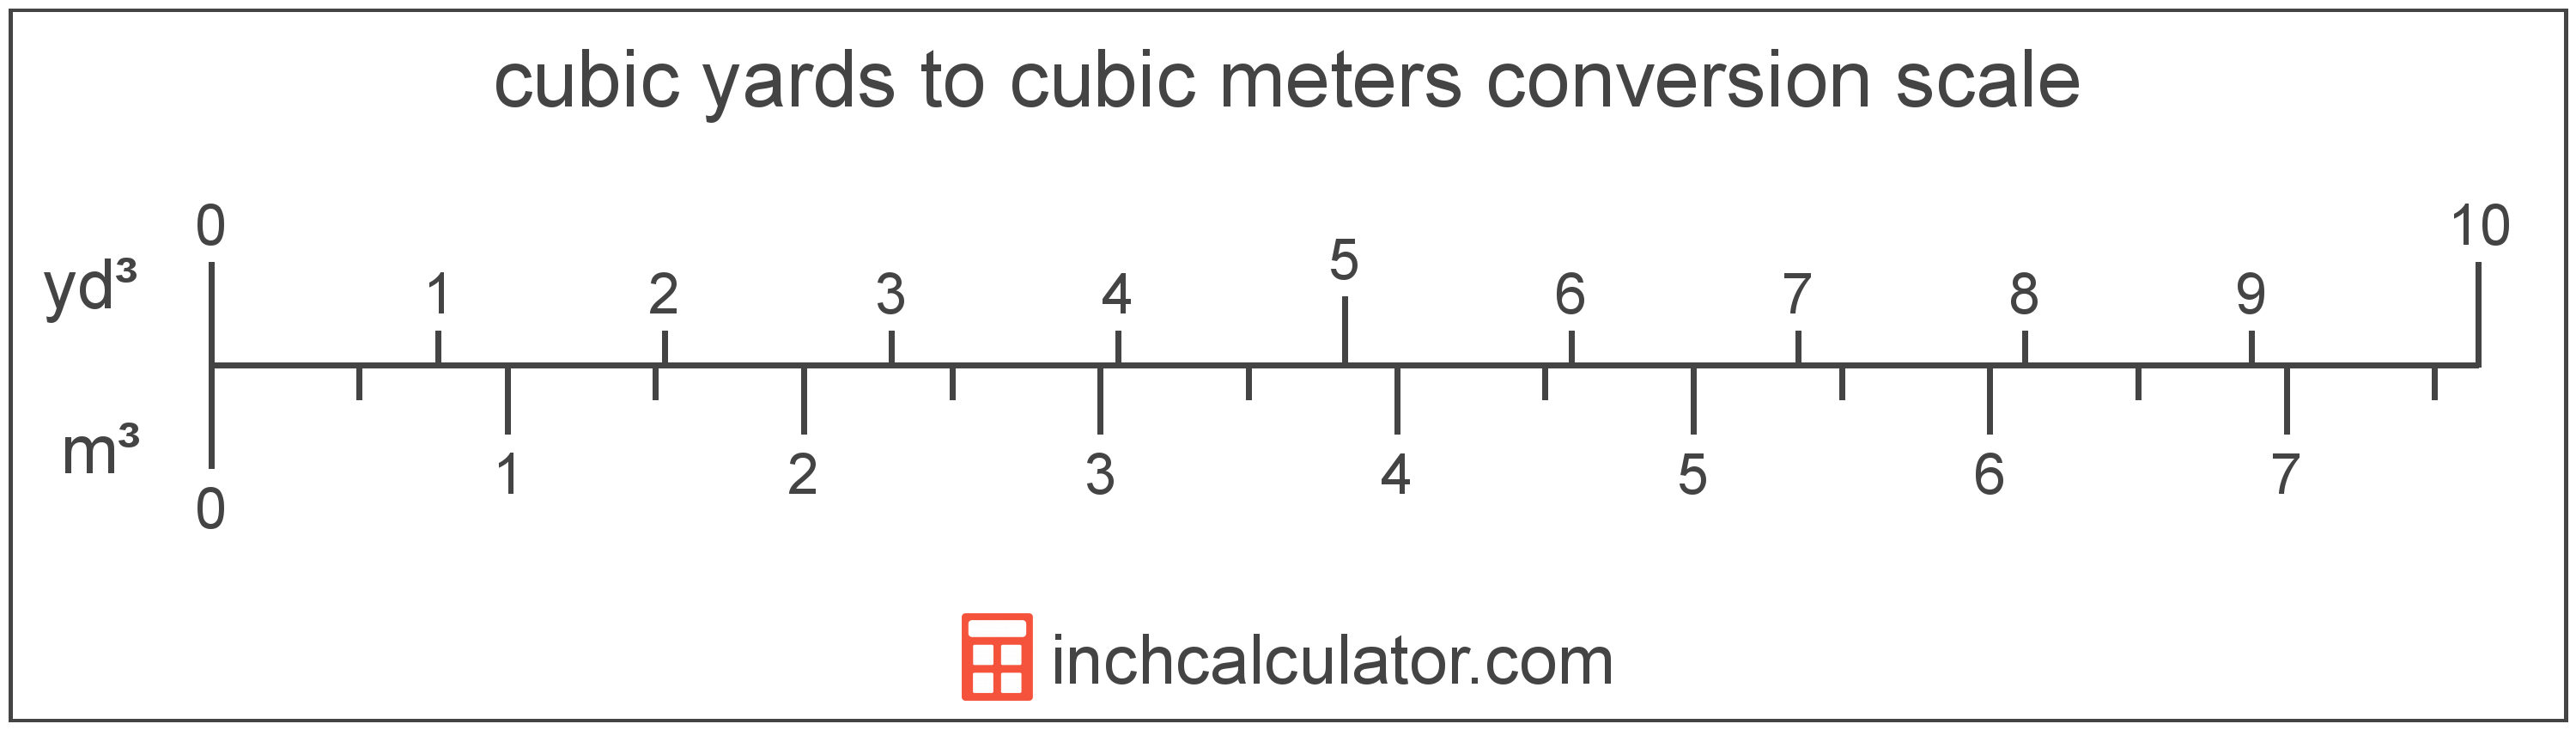 conversion scale showing cubic meters and equivalent cubic yards volume values